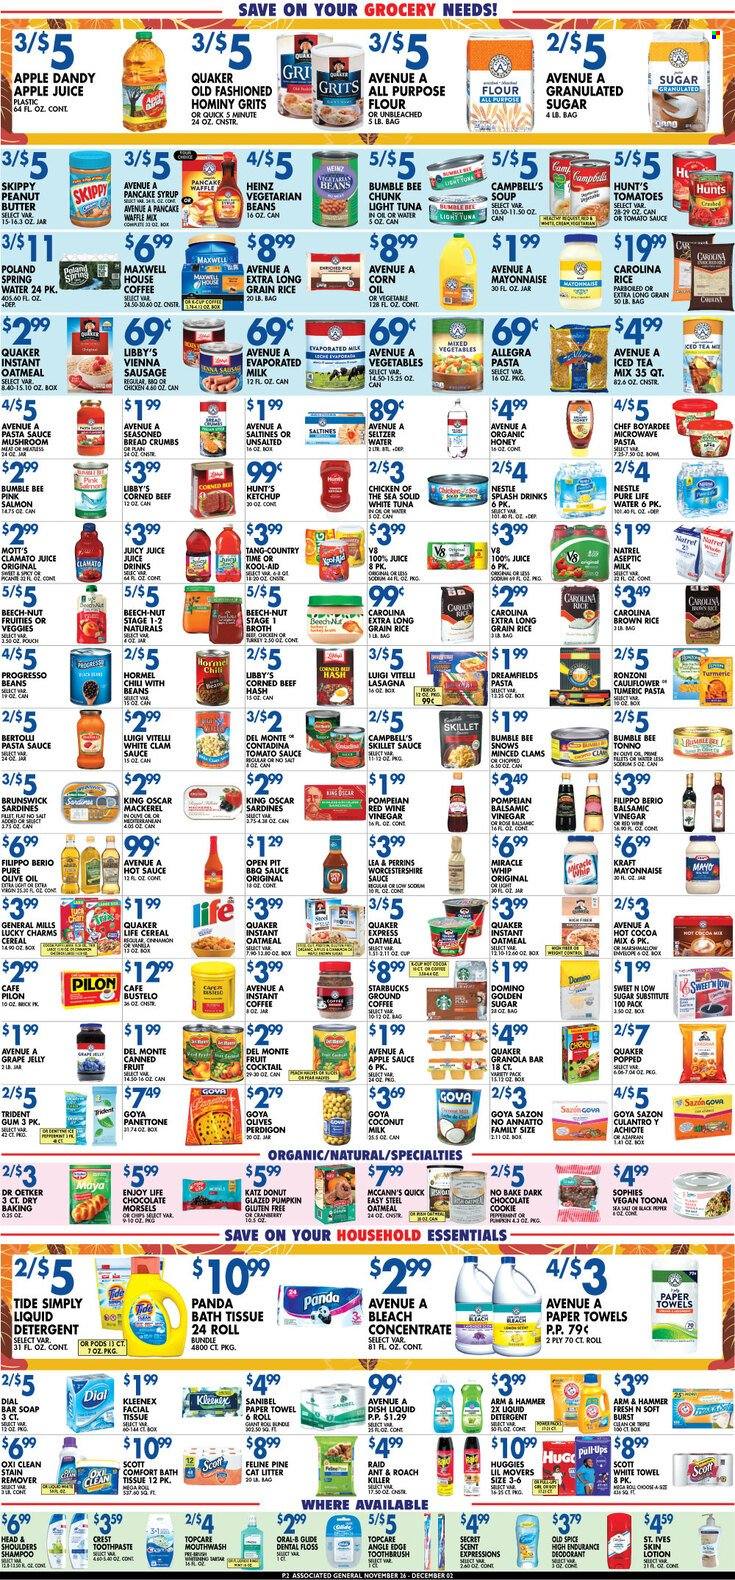 thumbnail - Associated Supermarkets Flyer - 11/26/2021 - 12/02/2021 - Sales products - mushrooms, panettone, donut, breadcrumbs, cauliflower, tomatoes, pumpkin, Mott's, clams, mackerel, salmon, sardines, tuna, beef hash, Campbell's, pasta sauce, soup, Bumble Bee, sauce, Quaker, Progresso, lasagna meal, Kraft®, Hormel, sausage, vienna sausage, corned beef, Dr. Oetker, butter, Miracle Whip, mixed vegetables, Nestlé, chocolate, jelly, Trident, saltines, all purpose flour, ARM & HAMMER, flour, granulated sugar, oatmeal, grits, broth, coconut milk, tomato sauce, Heinz, light tuna, Chicken of the Sea, Goya, Chef Boyardee, canned fruit, cereals, granola, granola bar, brown rice, rice, long grain rice, turmeric, spice, BBQ sauce, worcestershire sauce, hot sauce, balsamic vinegar, corn oil, vinegar, wine vinegar, olive oil, apple sauce, grape jelly, honey, pancake syrup, syrup, apple juice, juice, ice tea, Clamato, seltzer water, Pure Life Water, hot cocoa, Maxwell House, Starbucks, instant coffee, ground coffee, beef meat, Huggies, bath tissue, Kleenex, Scott, kitchen towels, paper towels, detergent, bleach, stain remover, Tide, liquid detergent, shampoo, Old Spice, soap bar, Dial, soap, toothbrush, Oral-B, toothpaste, mouthwash, Crest, Head & Shoulders, body lotion, anti-perspirant, deodorant, roach killer, Raid. Page 2.